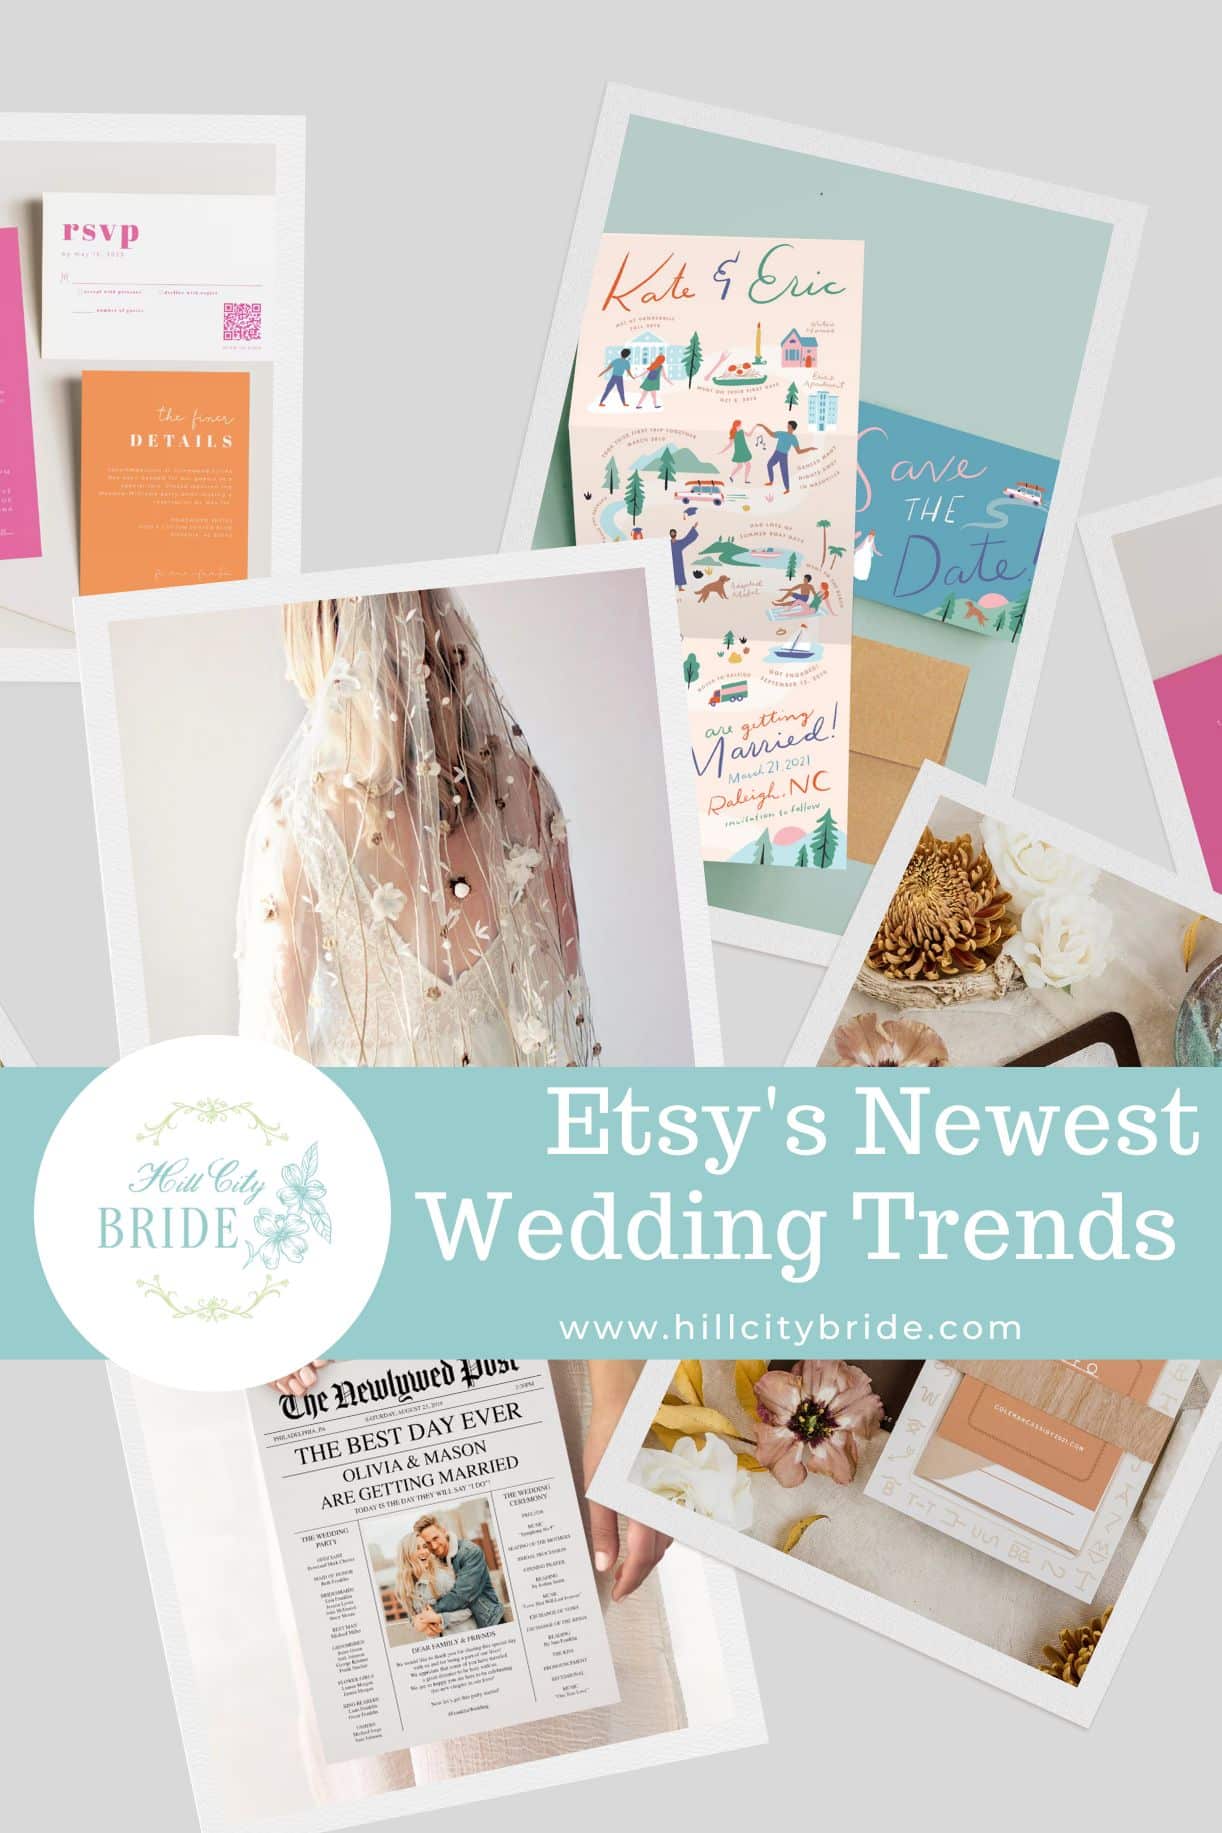 Wedding Trends from Etsy